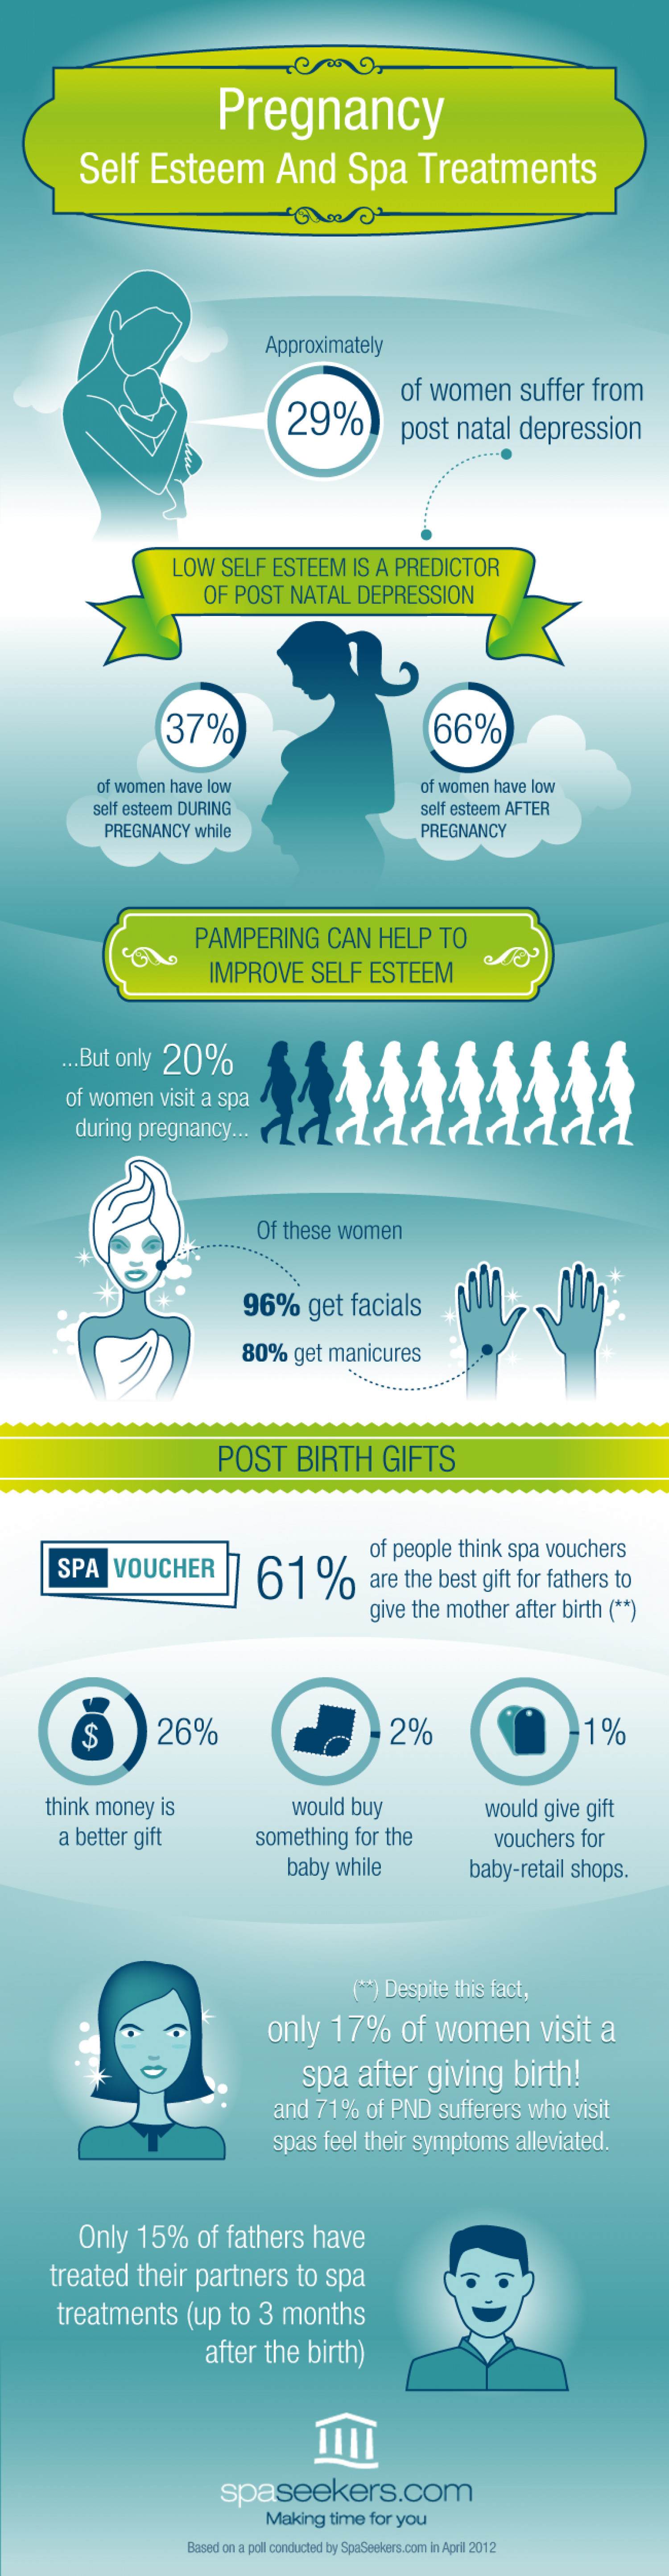 Pregnancy: Self Esteem and Spa Treatments Infographic